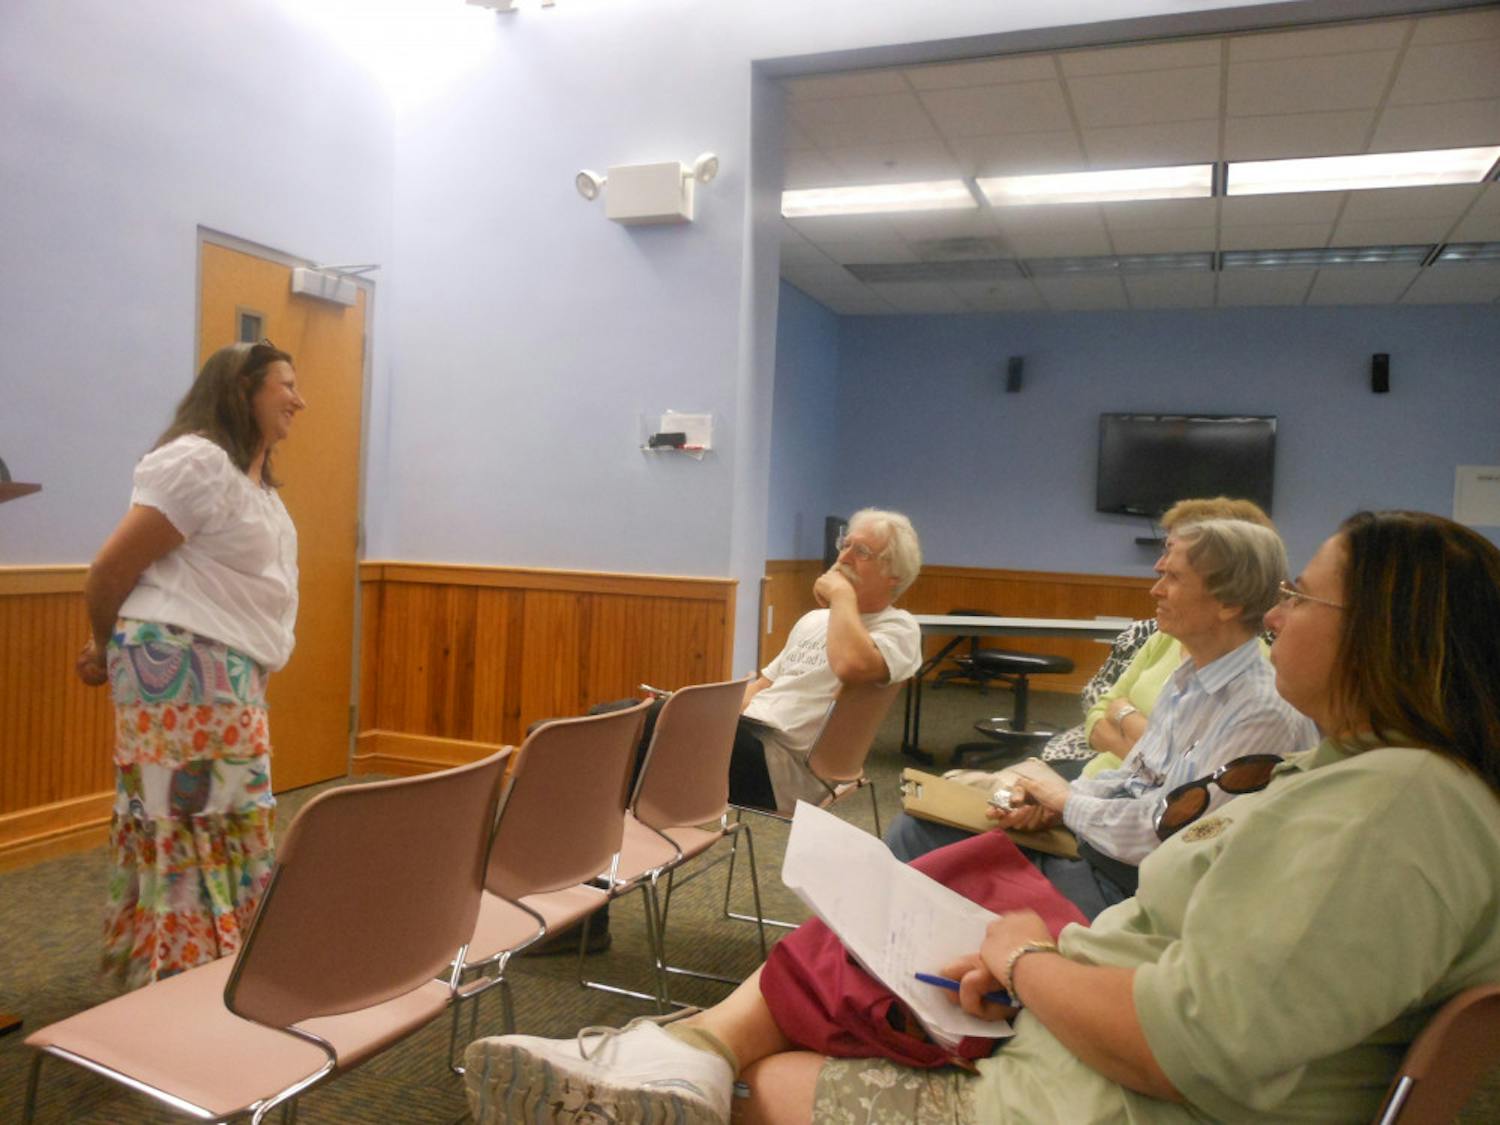 Mary Glazer may not consider herself a writer, but her presentation at the Writers’ Alliance of Gainesville Meeting Sunday showcased how to start a new chapter in your life and with writing. 